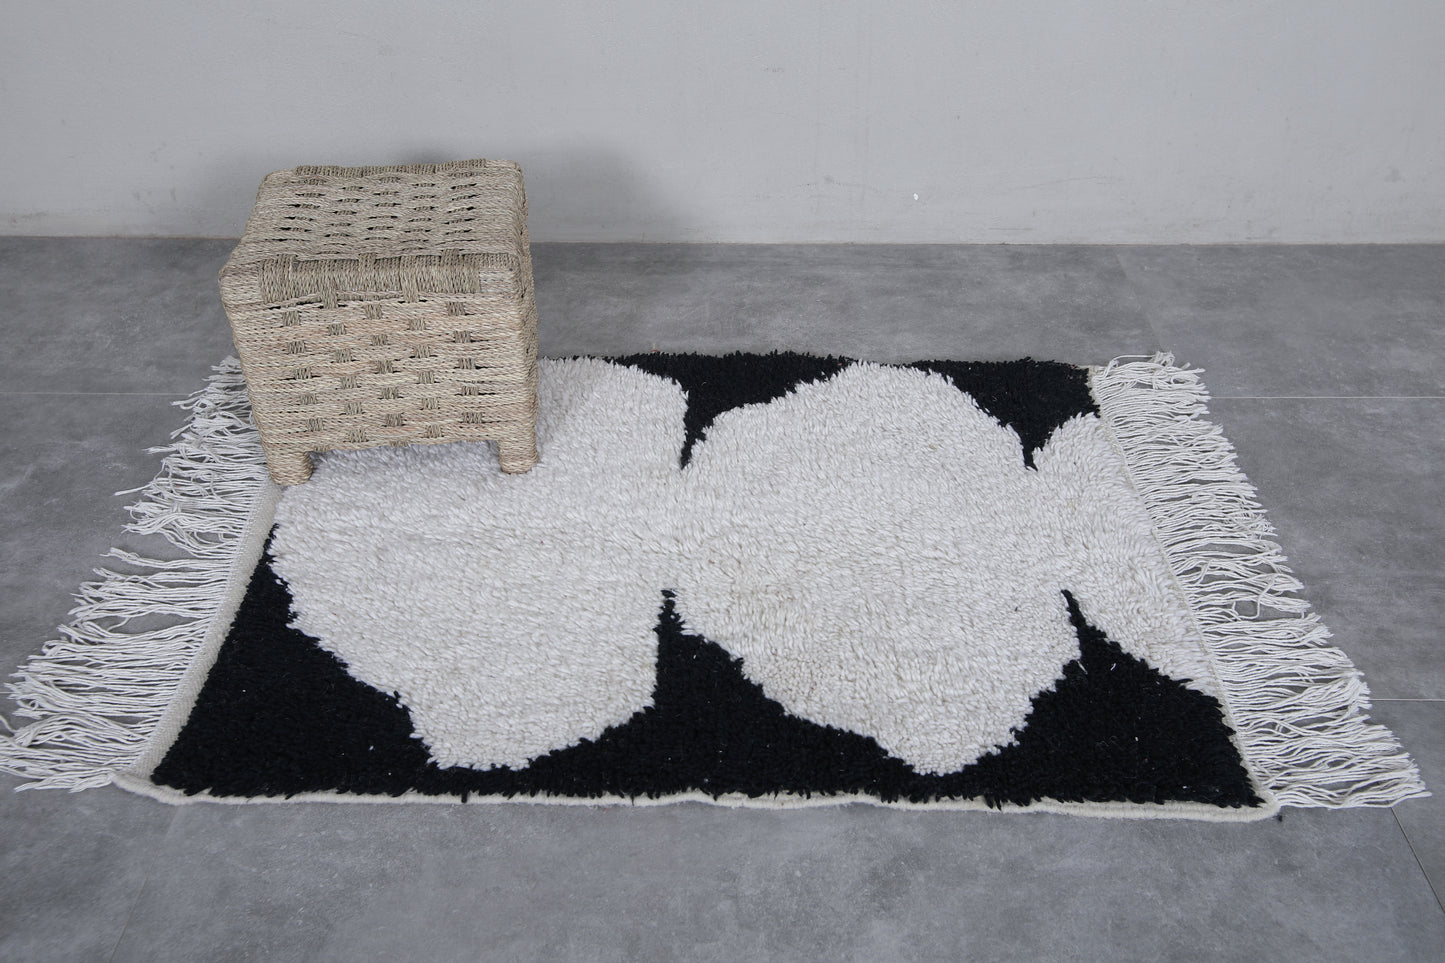 Black and White Moroccan rug 2.7 X 3.7 Feet